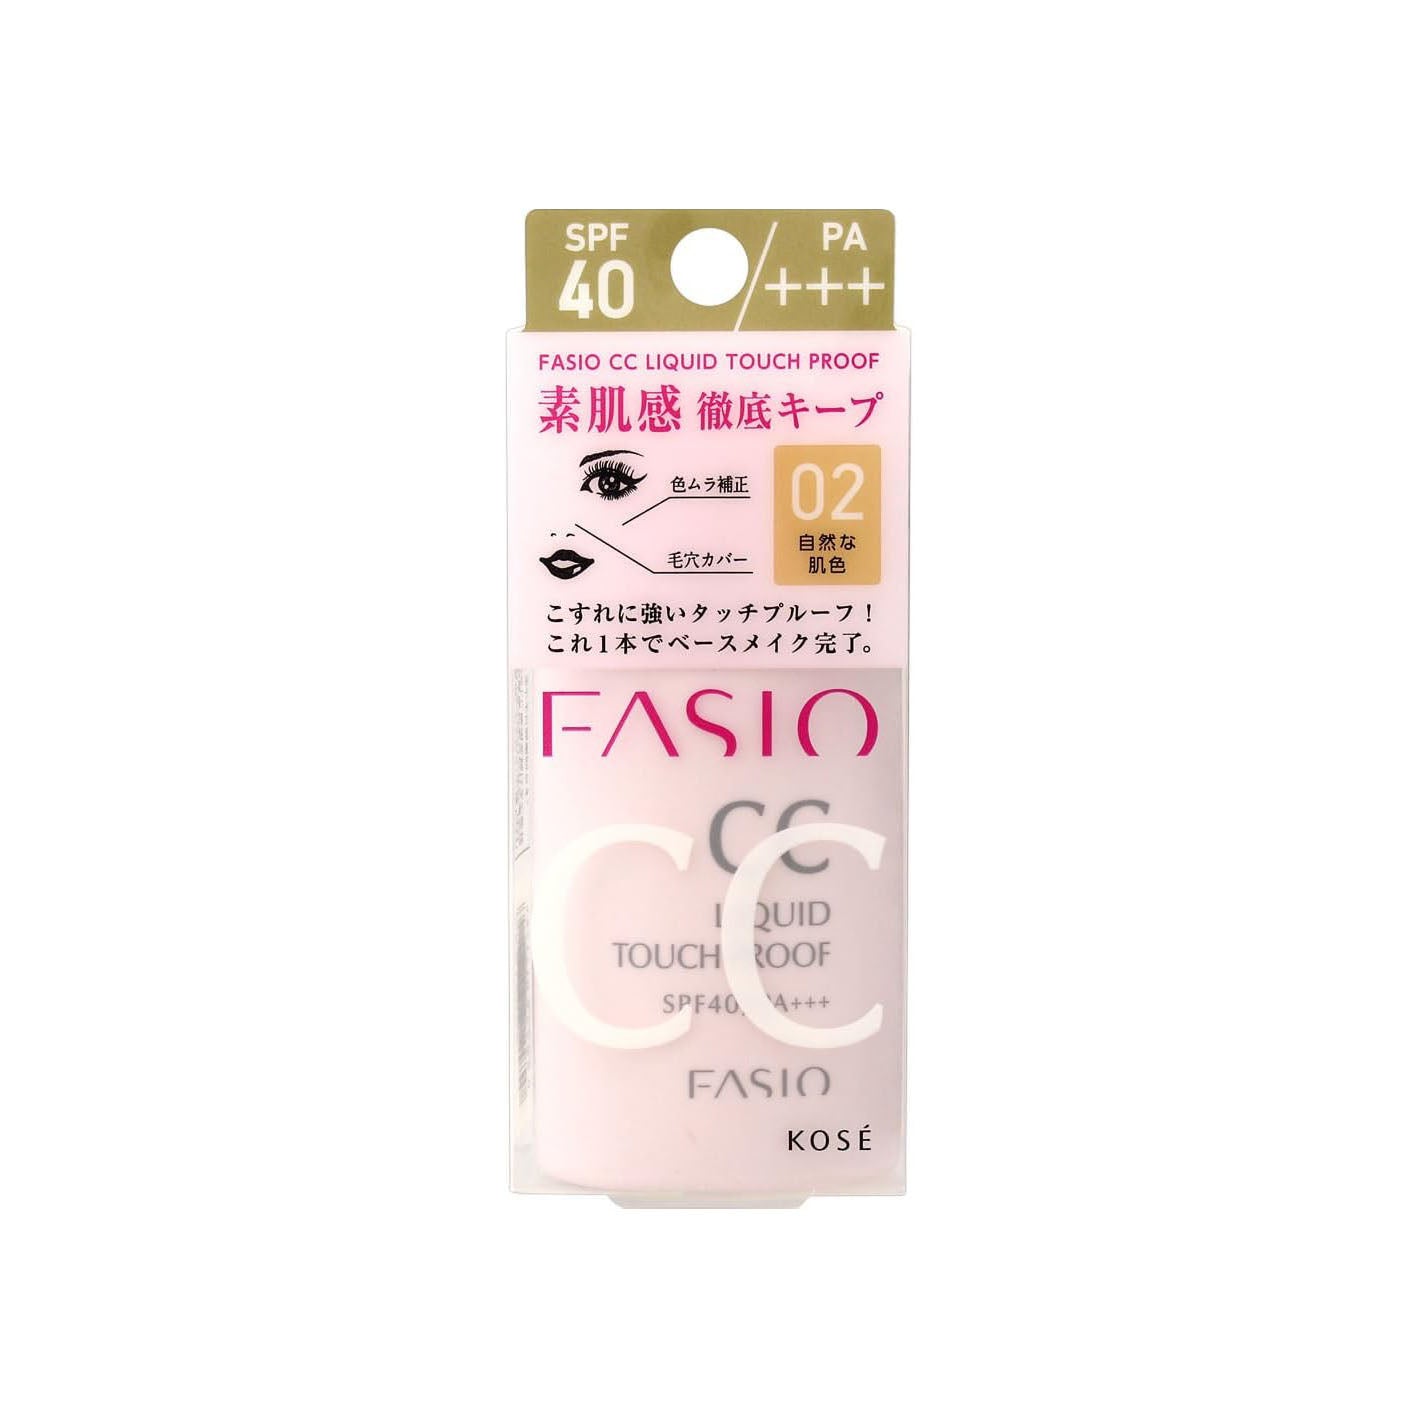 Kose Fasio CC Liquid Touch Proof SPF40/PA+++ - 02 - Harajuku Culture Japan - Japanease Products Store Beauty and Stationery